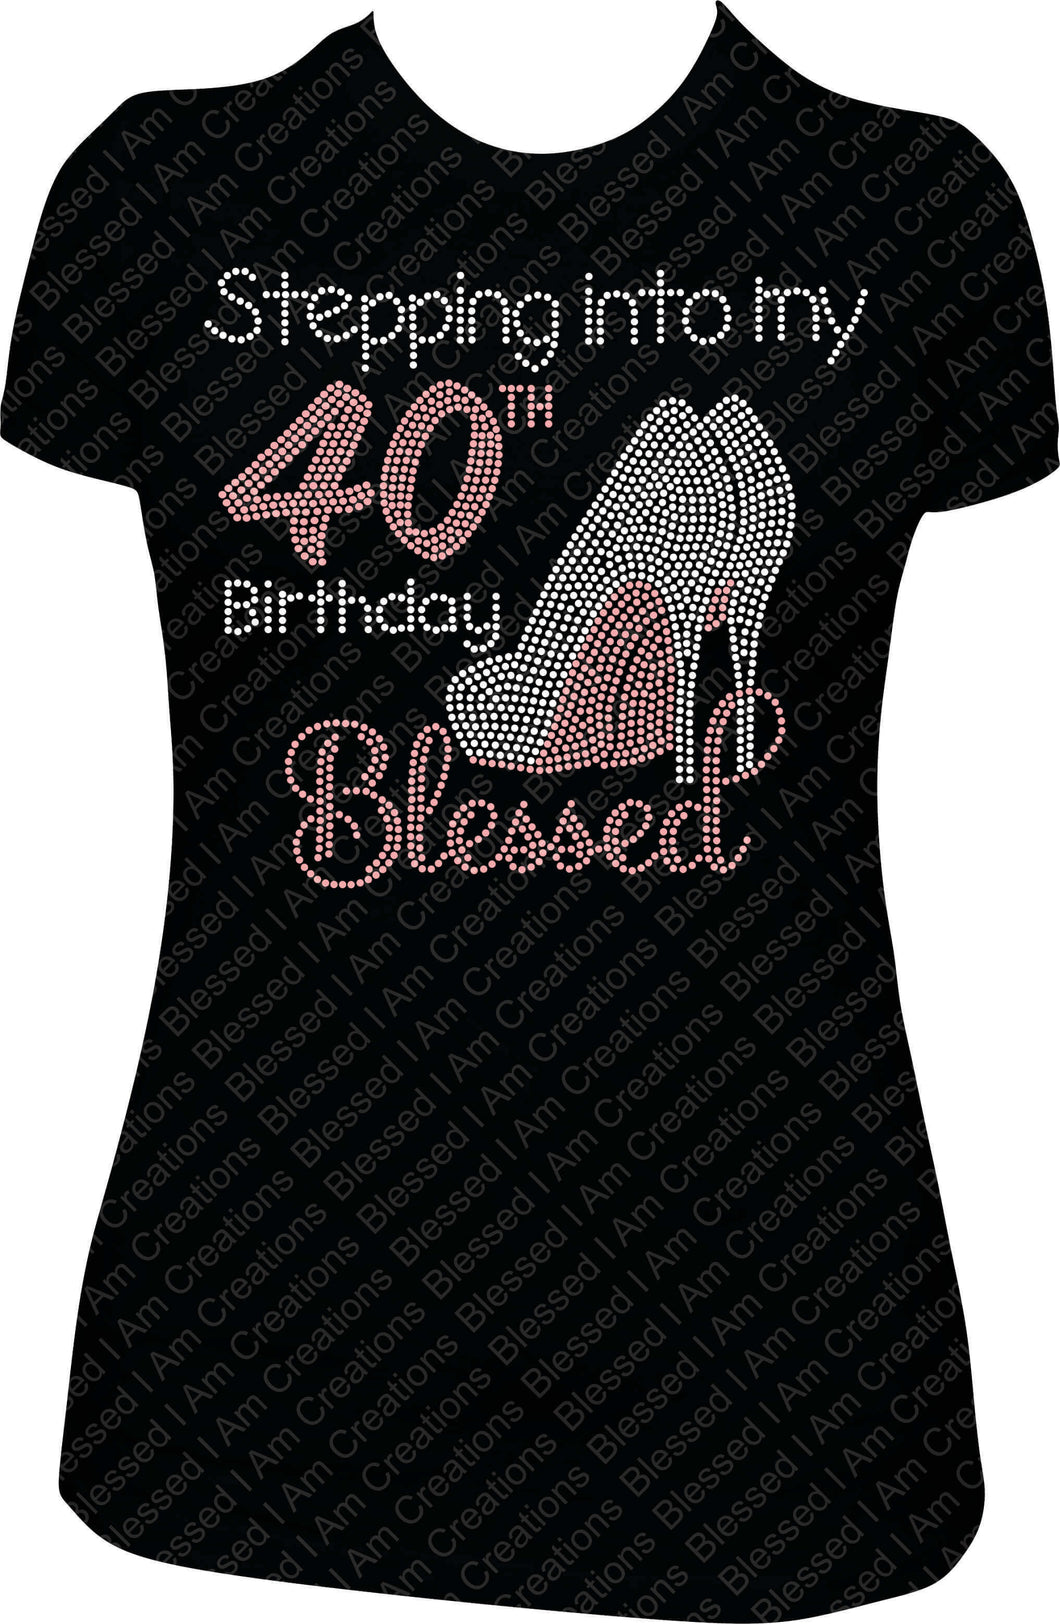 Stepping into my 40th Birthday Blessed Rhinestone Shirt, 40th Birthday Shirt, 40 Bling Birthday Shirt, Rhinestone Shirt, Bling shirt, Birthday girl shirt 